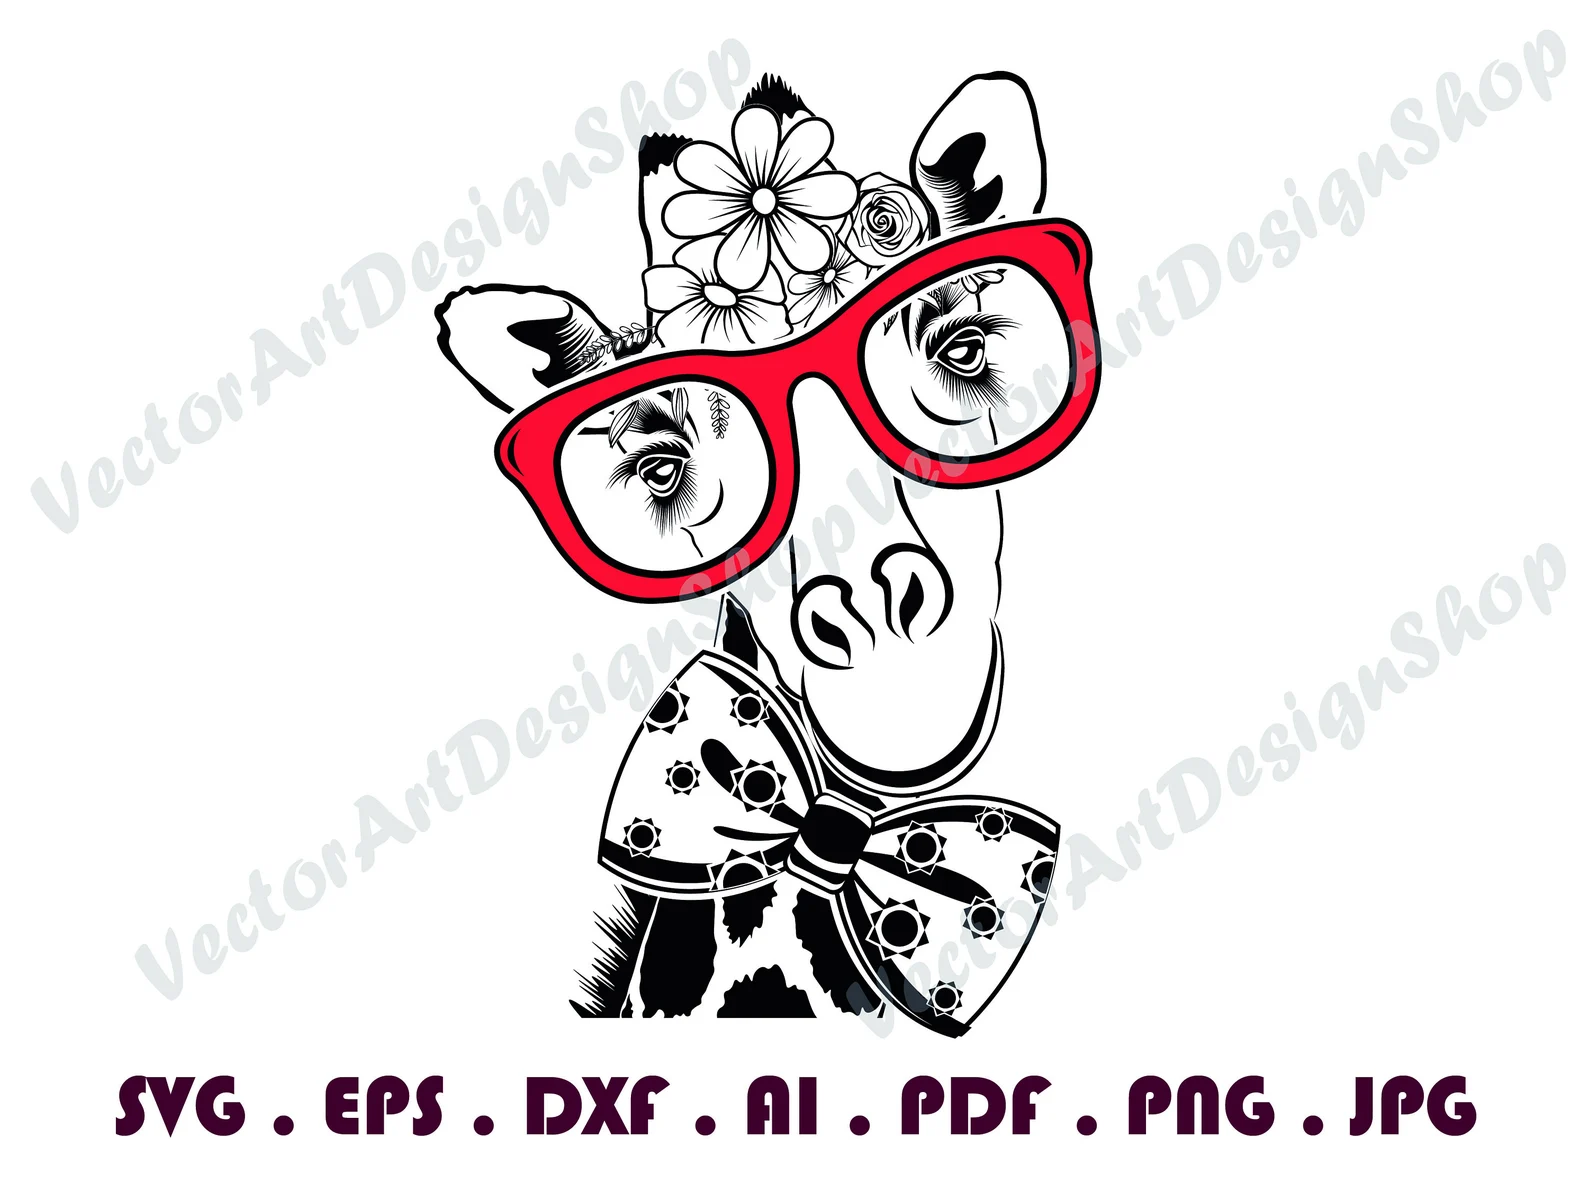 Giraffe wearing red glasses and a bow tie.